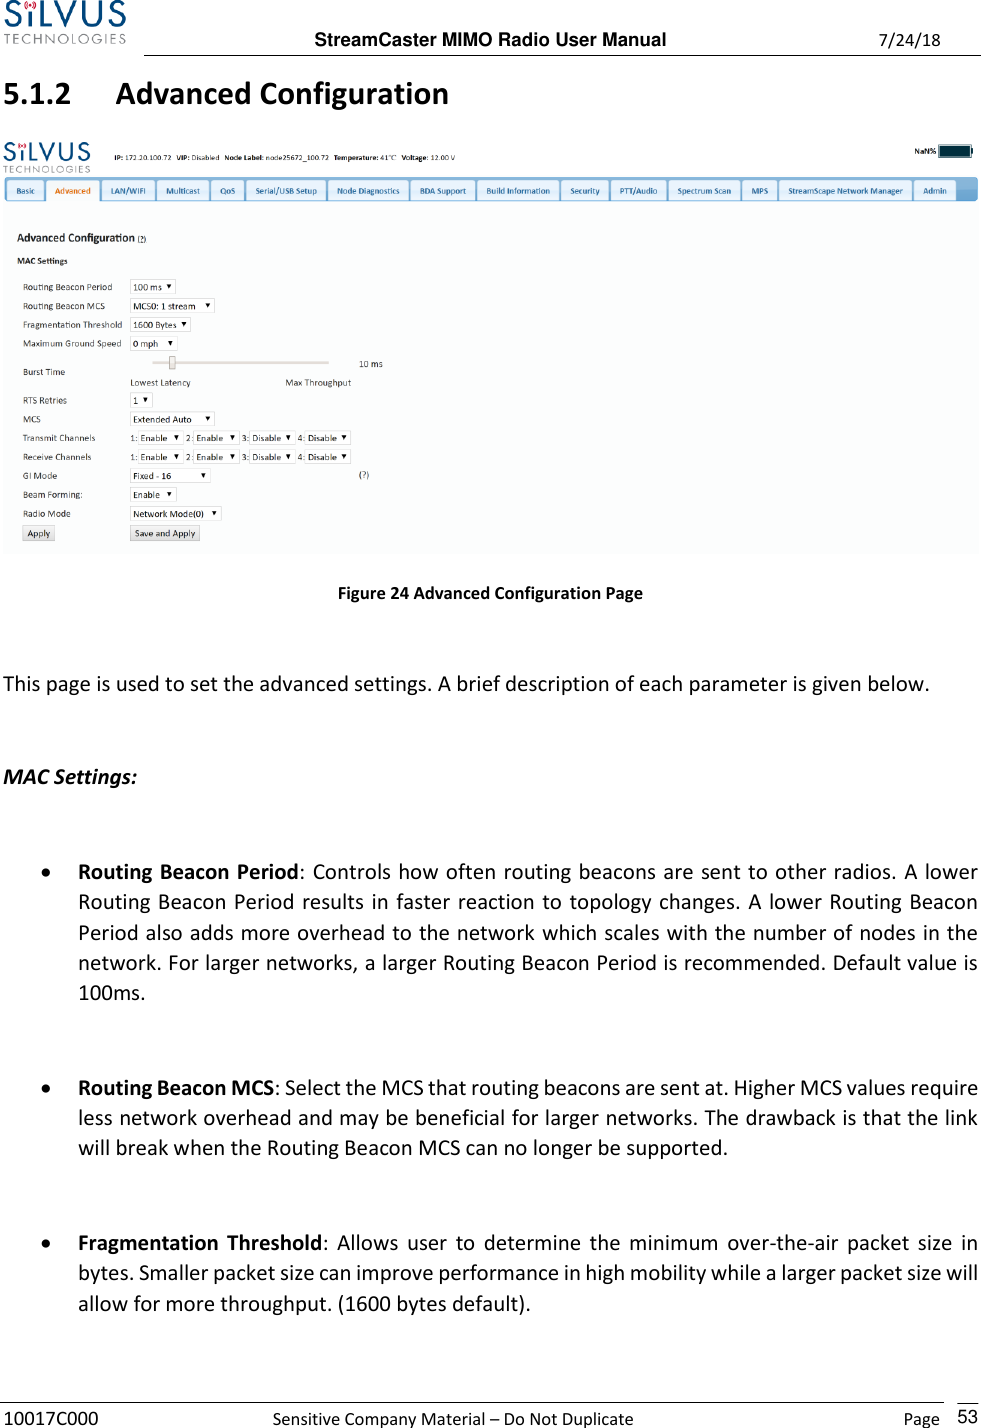  StreamCaster MIMO Radio User Manual  7/24/18 10017C000  Sensitive Company Material – Do Not Duplicate    Page    53 5.1.2 Advanced Configuration  Figure 24 Advanced Configuration Page  This page is used to set the advanced settings. A brief description of each parameter is given below.  MAC Settings:  • Routing Beacon Period: Controls how often routing beacons are sent to other radios. A lower Routing Beacon Period results in faster reaction to topology changes. A lower Routing Beacon Period also adds more overhead to the network which scales with the number of nodes in the network. For larger networks, a larger Routing Beacon Period is recommended. Default value is 100ms.  • Routing Beacon MCS: Select the MCS that routing beacons are sent at. Higher MCS values require less network overhead and may be beneficial for larger networks. The drawback is that the link will break when the Routing Beacon MCS can no longer be supported.  • Fragmentation Threshold:  Allows  user to determine the minimum  over-the-air packet  size in bytes. Smaller packet size can improve performance in high mobility while a larger packet size will allow for more throughput. (1600 bytes default).  